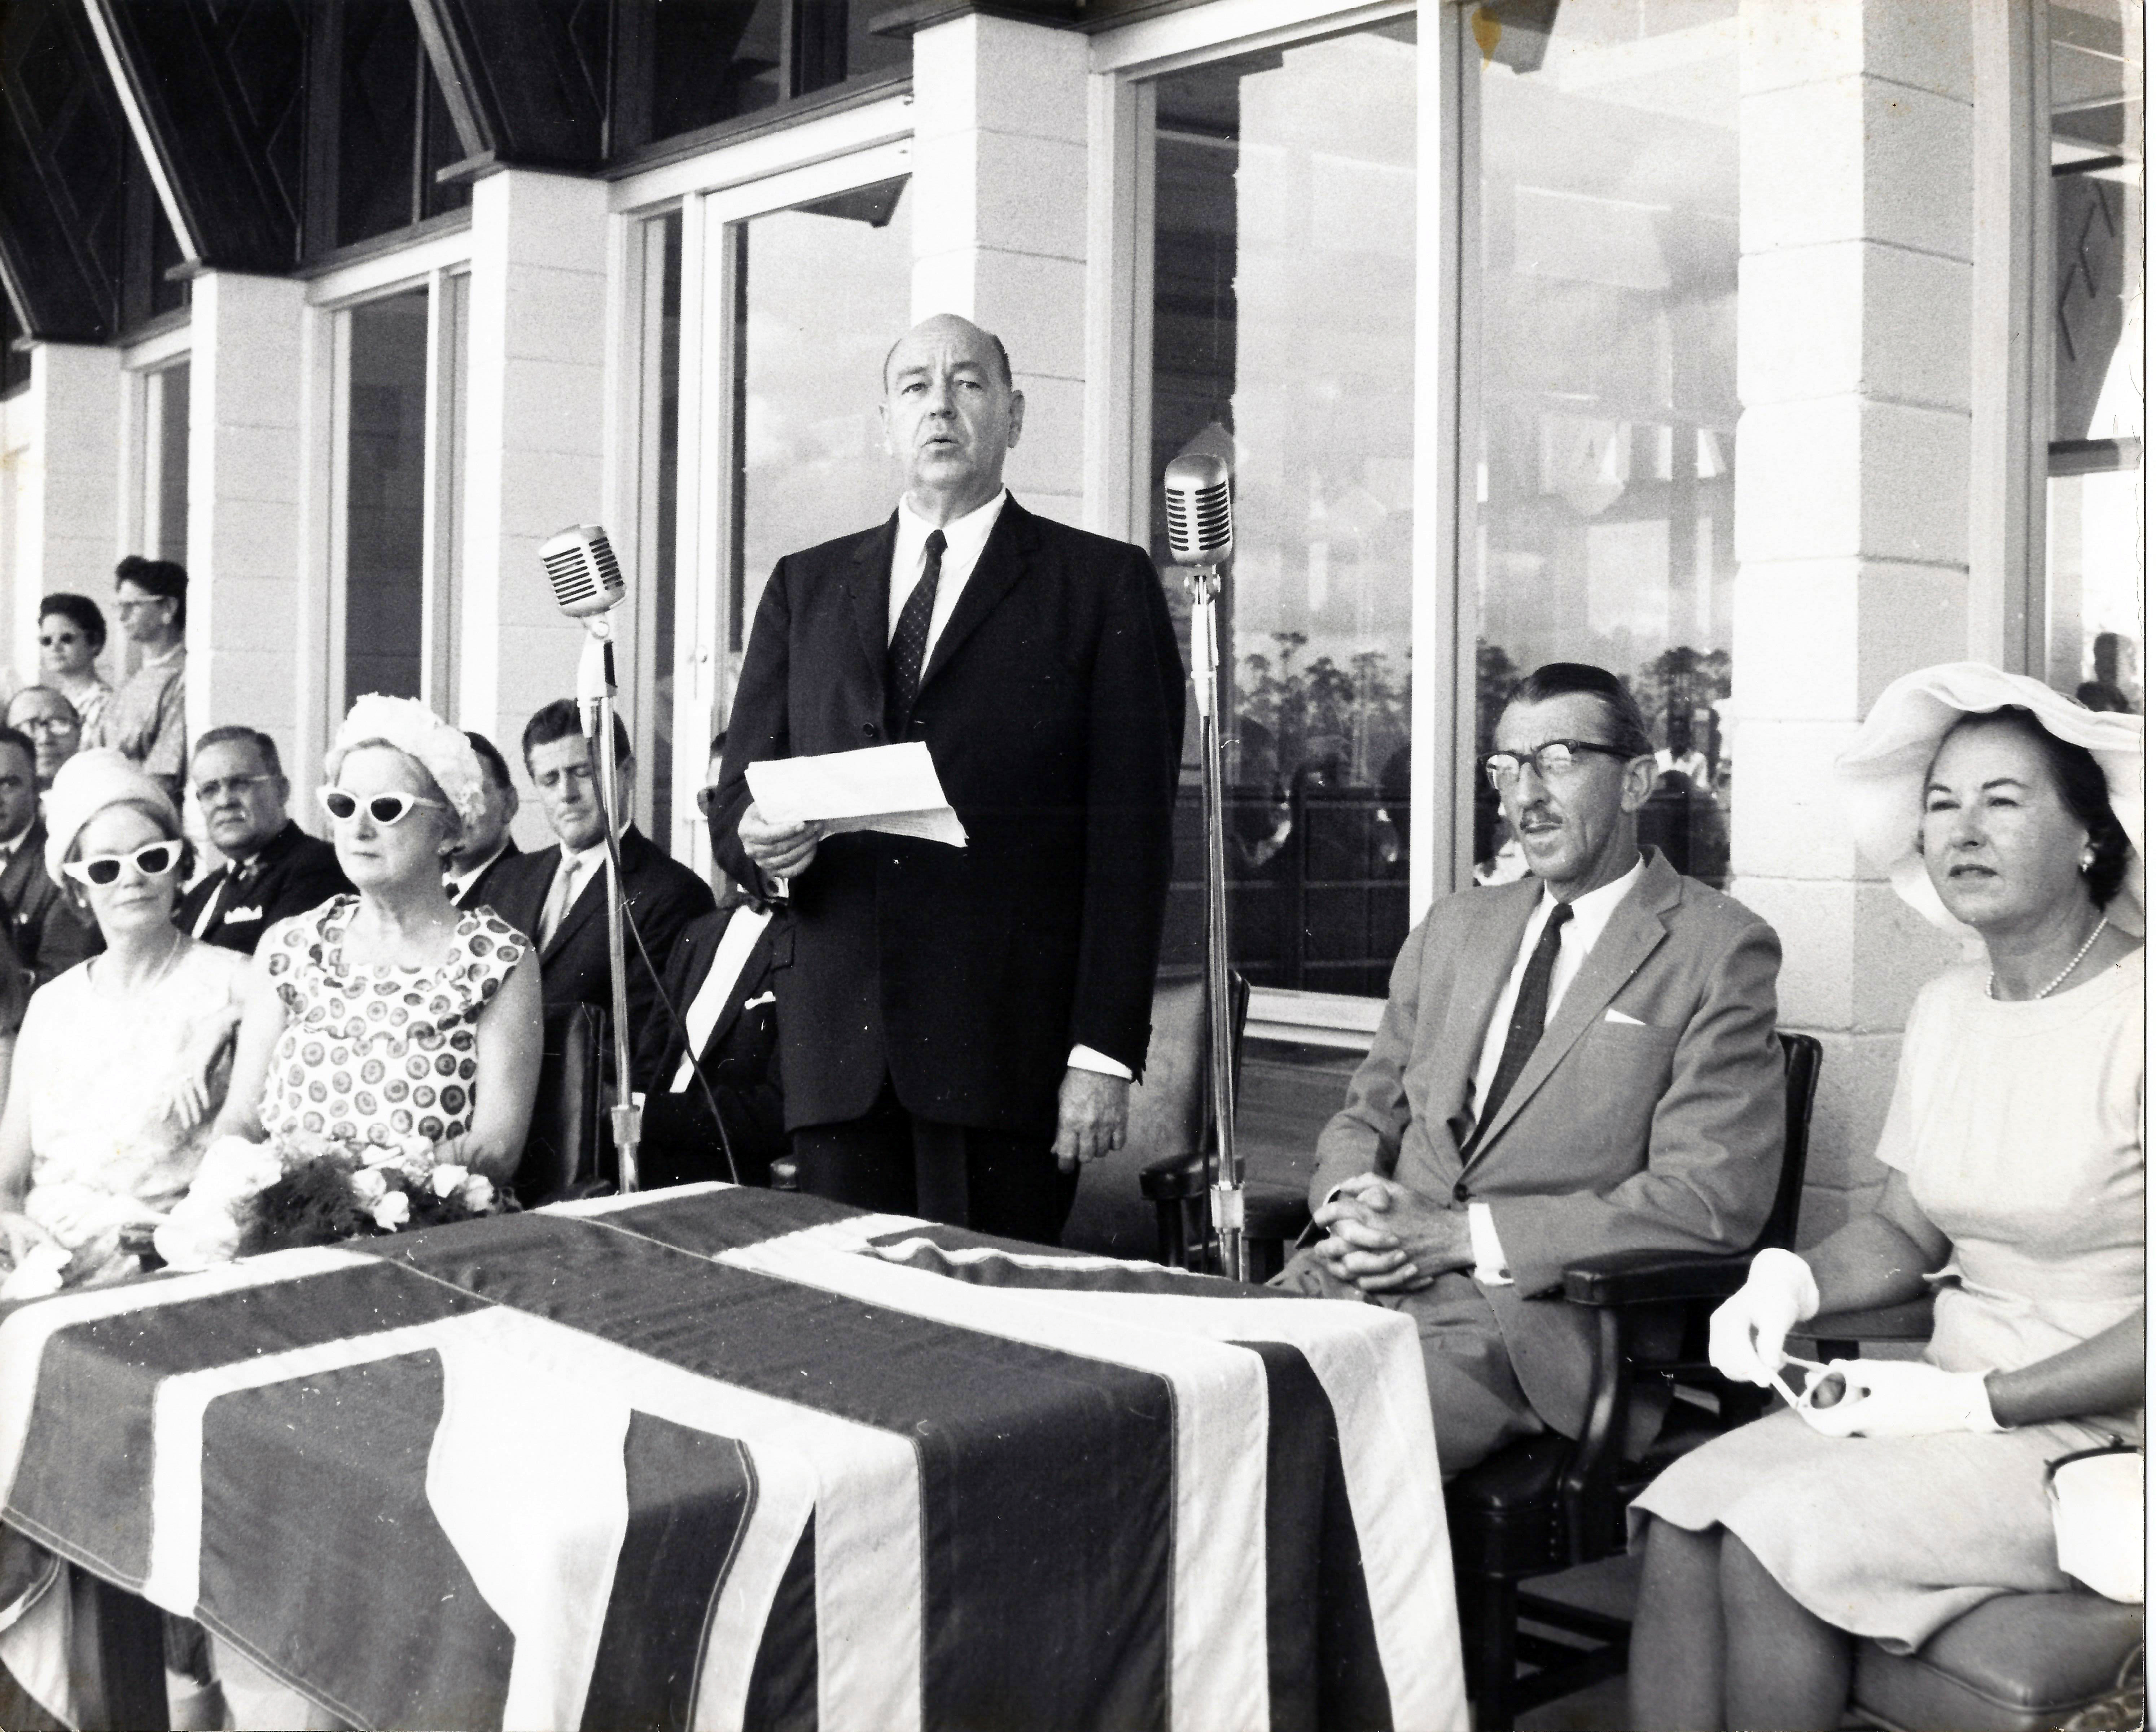 Wallace Groves at the dedication of the Freeport Airport, 1960's